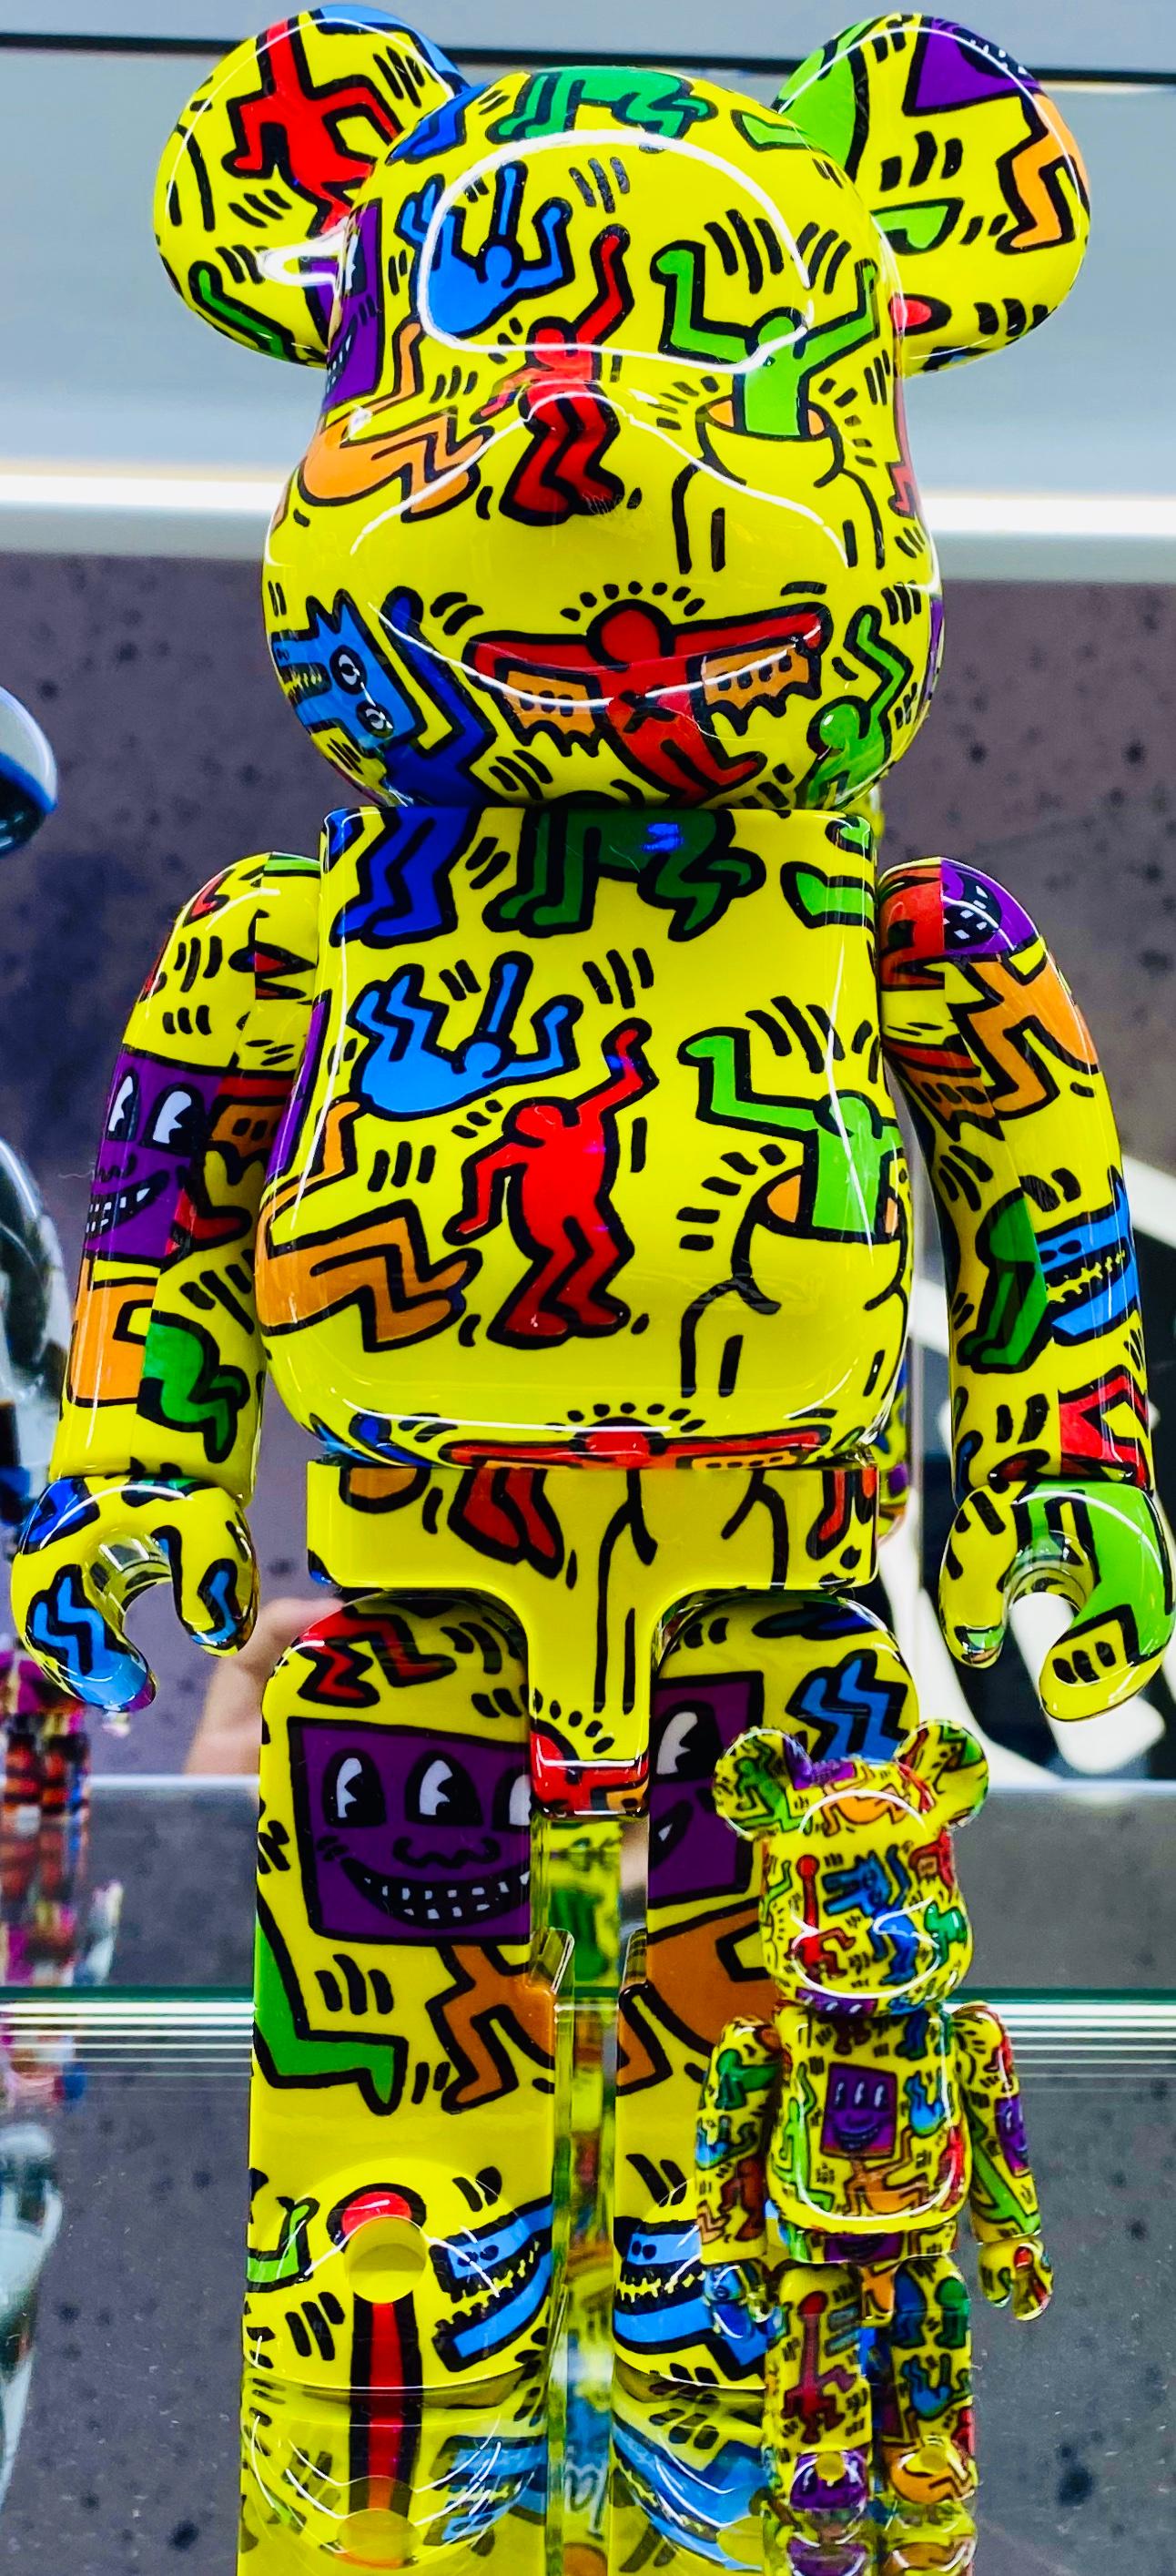 Keith Haring 400% Bearbrick Companion (Haring BE@RBRICK) - Sculpture by (after) Keith Haring